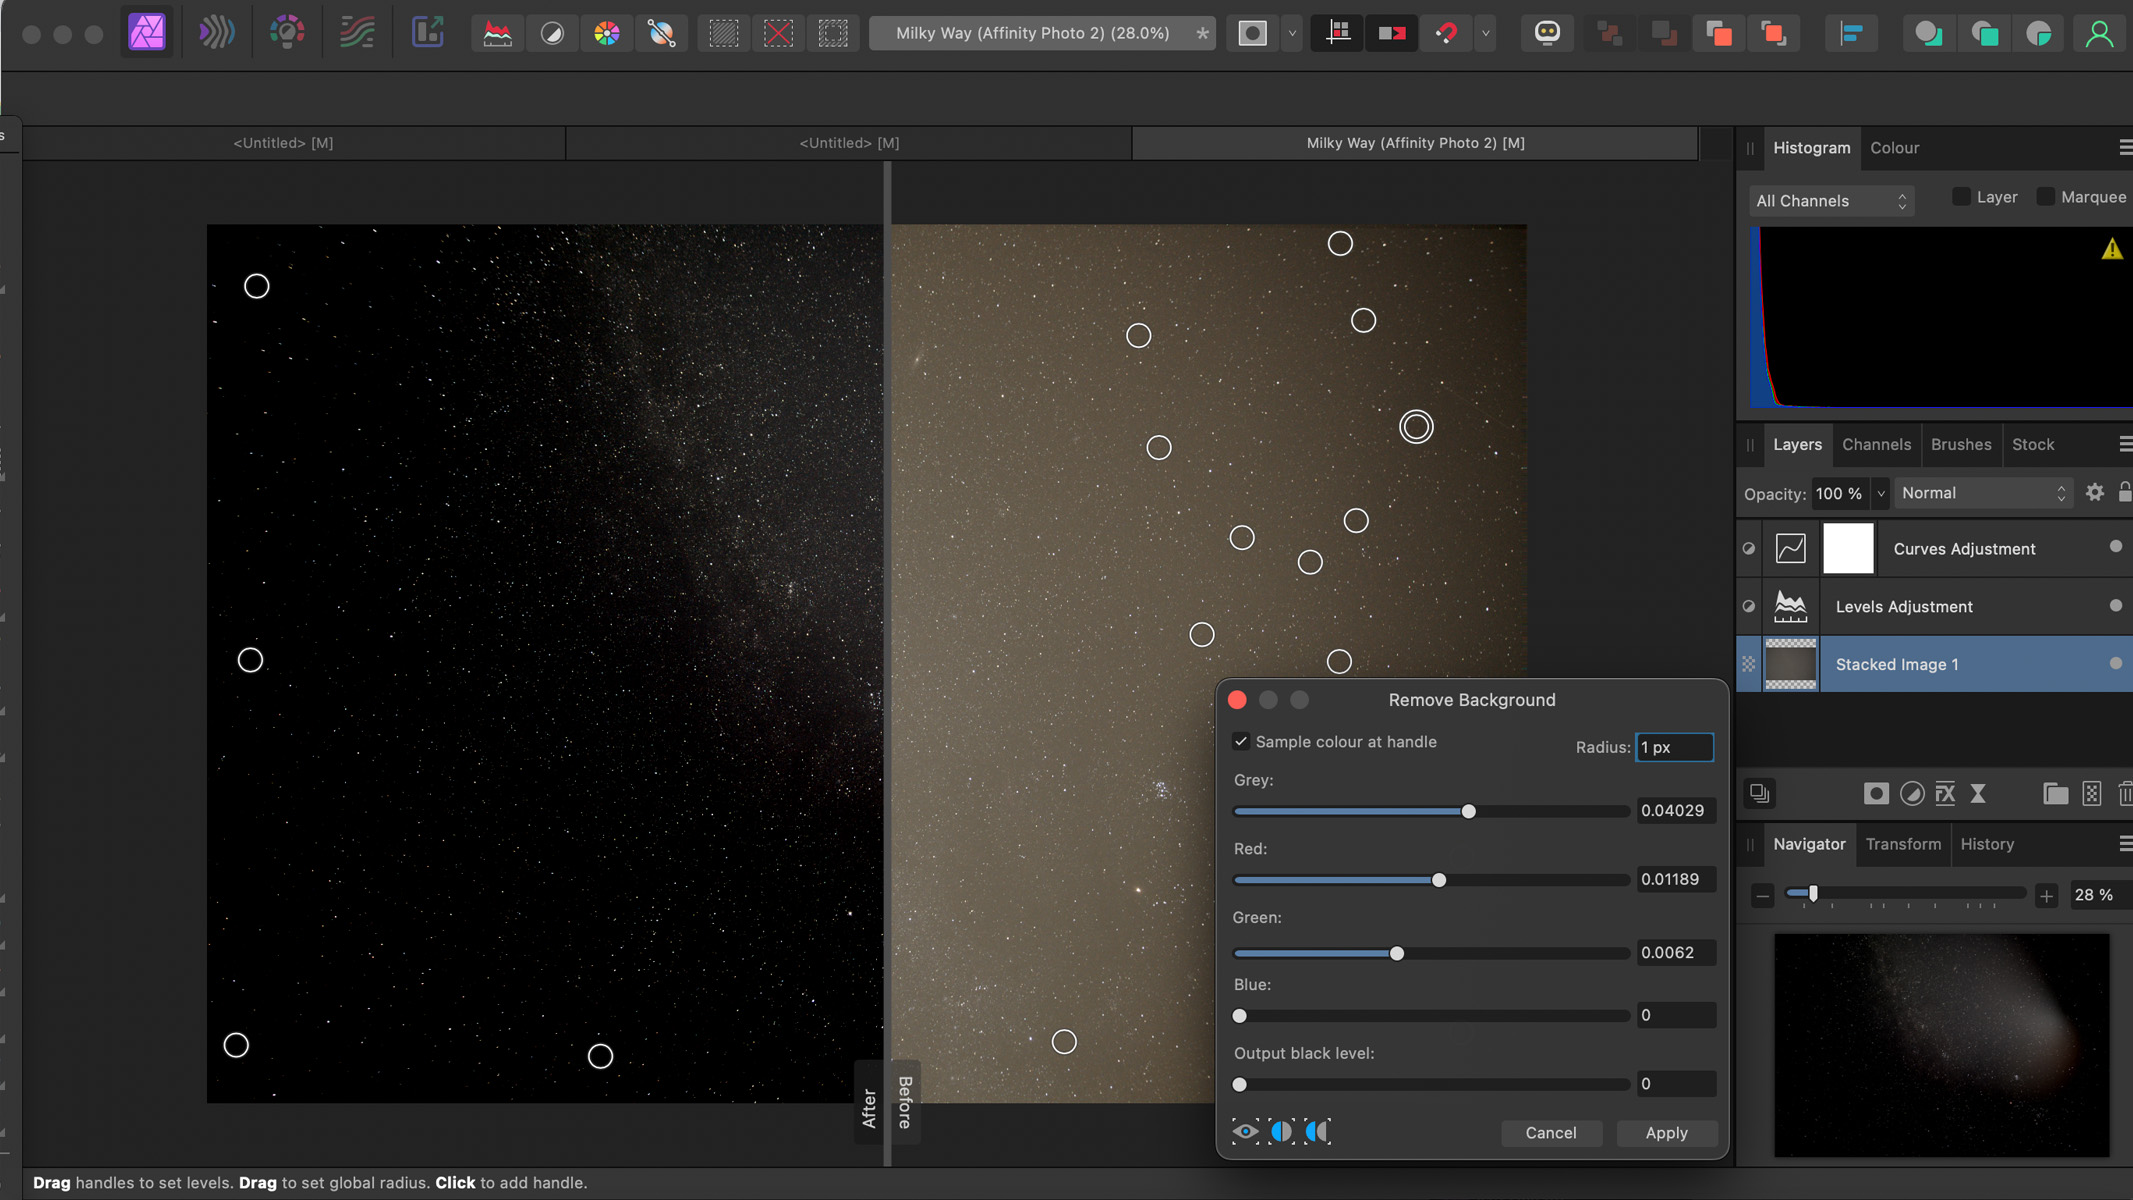 Remove Background tool being used on an astro photo in Affinity Photo 2